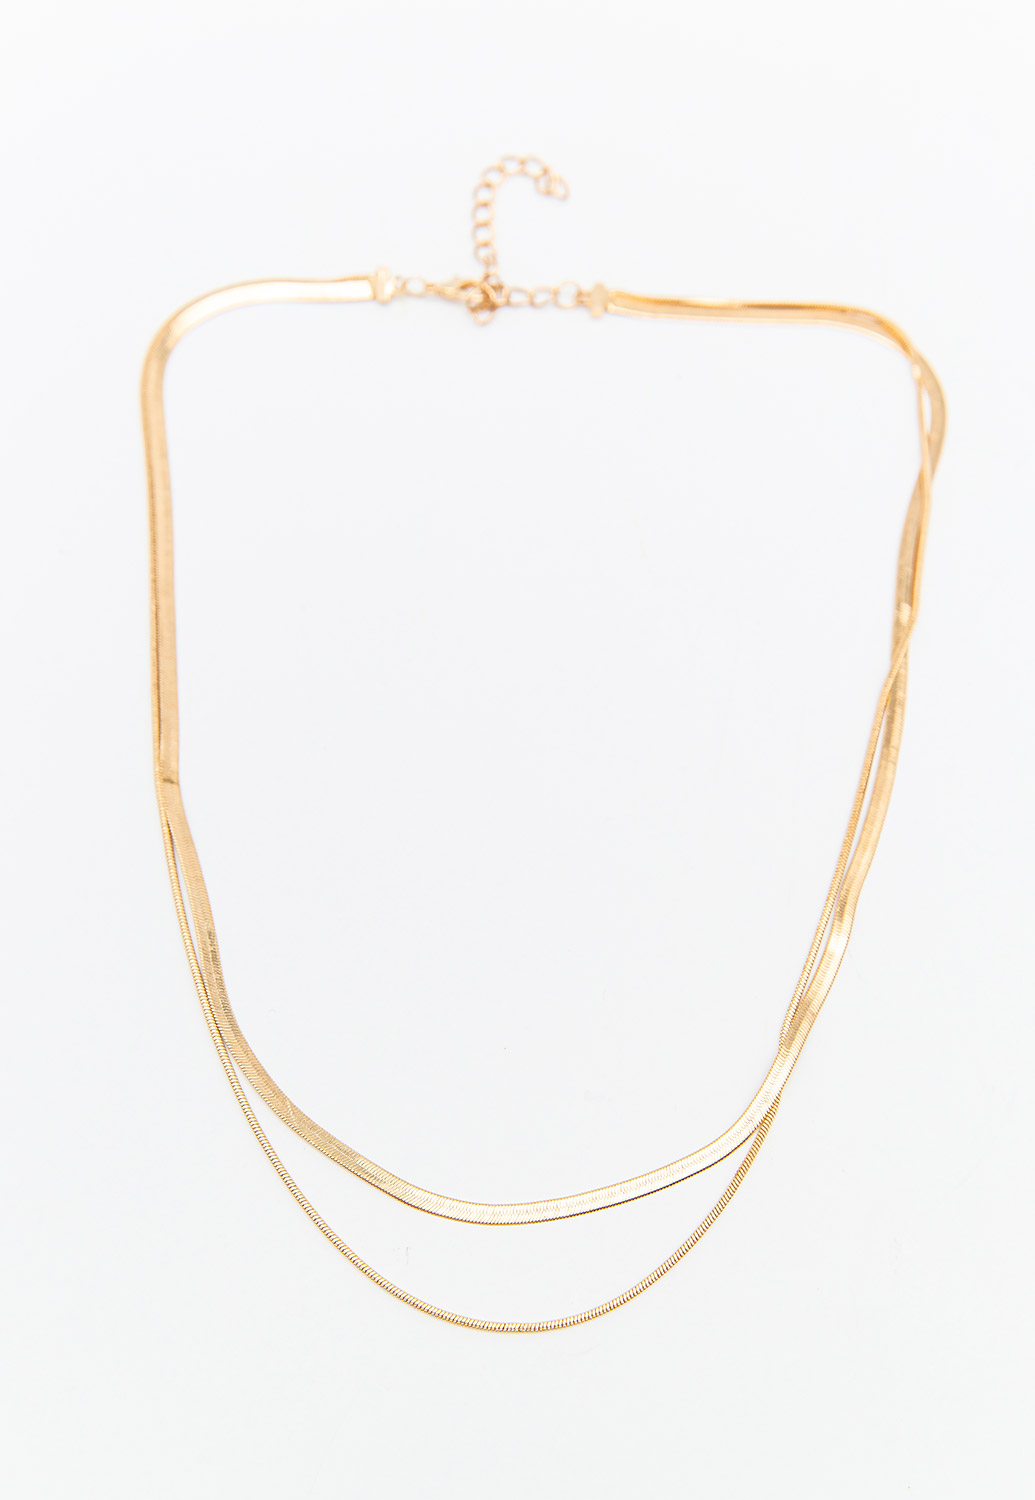 Multi-Layered Gold Chain Necklace With Charm 